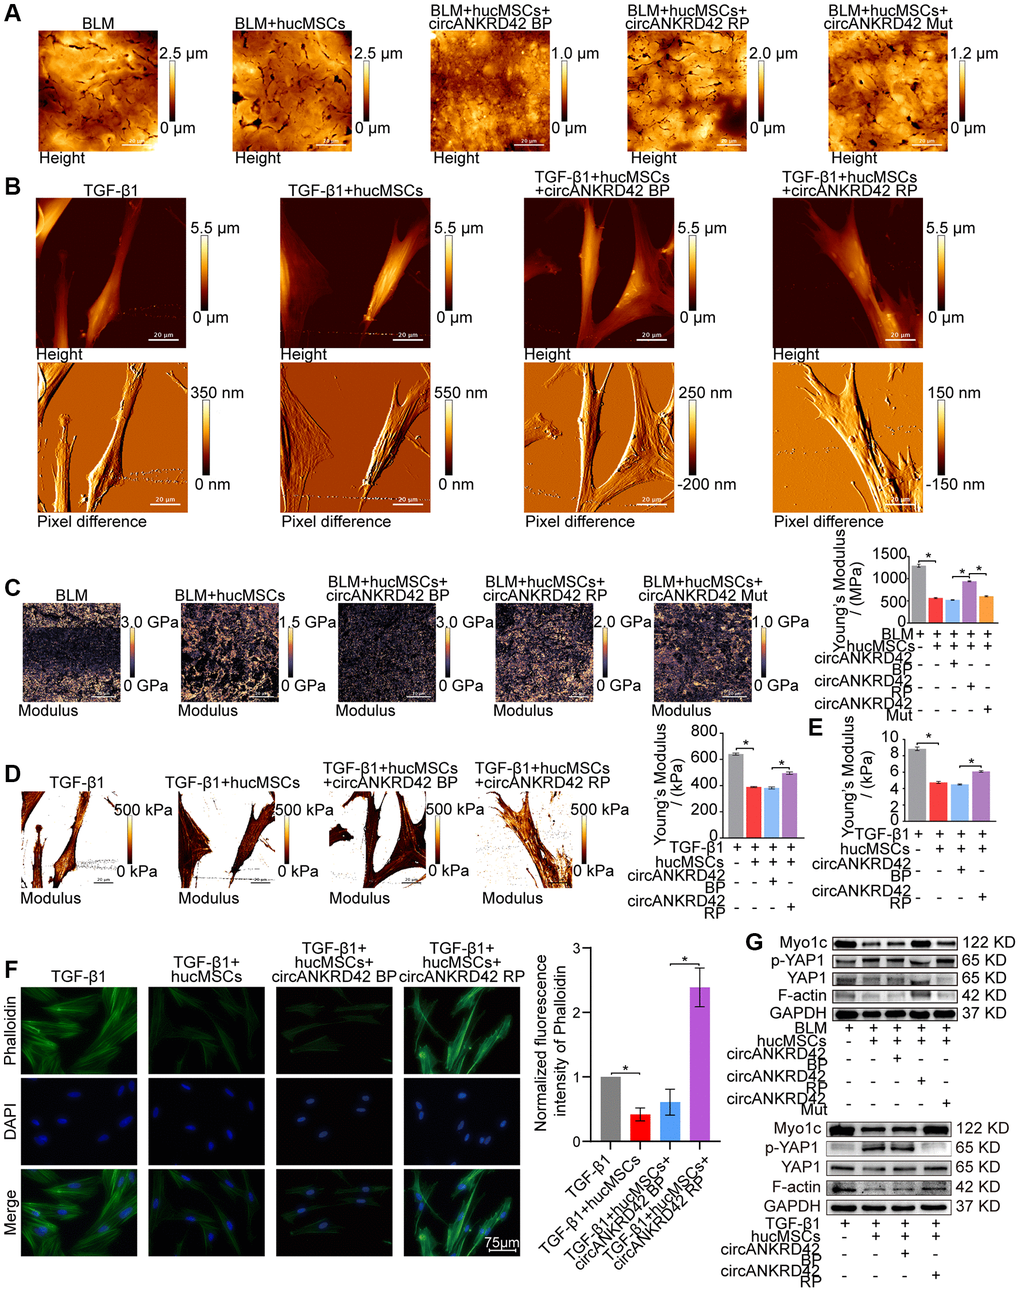 Rescue experiments proved that hucMSCs treatment reduced mechanical stiffness by regulating circANKRD42–miR-136-5p–YAP1 signal pathway in vivo and in vitro. (A) AFM images depicted that BLM caused the roughness of the lung surface and the thickening of the lung tissues. hucMSCs treatment improved the lung tissue morphology, but this therapeutic effect was reversed by overexpressed circANKRD42. The effect of circANKRD42 mutation was weaker than that of overexpressed circANKRD42. (B) In the TGF-β1 group, the cells became slender and flat. Stress fibers arranged in parallel along the main axis of cells were observed in the group. In the hucMSCs-treated group, the cell shape significantly retracted and the corresponding fibers were reduced. Overexpressed circANKRD42 reversed the effect of hucMSCs treatment on cells. (C) Young’s modulus measurement showed that hucMSCs treatment decreased the force compared with that in the BLM group, but overexpressed circANKRD42 reversed the effect of hucMSCs treatment on the force. The effect of circANKRD42 mutation on the force was weaker than that of overexpressed circANKRD42. The measured average Young’s modulus was 1291.667 ± 82.735 MPa in the BLM group, 563.833 ± 31.822 MPa in the BLM+hucMSCs group, 520 ± 20.460 MPa in the BLM+hucMSCs+circANKRD42 BP group, 942.05 ± 28.203 MPa in the BLM+hucMSCs+circANKRD42 RP group, and 604.233 ± 29.259 MPa in BLM+hucMSCs+circANKRD42 Mut. (D) Young’s modulus measurement revealed that hucMSCs treatment decreased the force compared with that in the TGF-β1 group, but overexpressed circANKRD42 reversed the effect of hucMSCs treatment on the force. The measured average Young's modulus was 641.167 KPa in the TGF-β1 group, 389.467 KPa in the TGF-β1+hucMSCs group, 382.767 in the TGF-β1+hucMSCs+circANKRD42 BP group, and 495.433 KPa in TGF-β1+hucMSCs+circANKRD42 RP. (E) Young’s modulus measurement showed that hucMSCs treatment decreased the reaction forces of cells compared with that in the TGF-β1 group, but overexpressed circANKRD42 reversed the effect of hucMSCs treatment on the force. The measured average Young's modulus was 8.858 ± 0.526 KPa in the TGF-β1 group, 4.756 ± 0.306 KPa in the TGF-β1+hucMSCs group, 4.504 ± 0.160 KPa in the TGF-β1+hucMSCs+circANKRD42 BP group, and 6.092 ± 0.240 KPa in TGF-β1+hucMSCs+circANKRD42 RP. (F) Cytoskeleton staining with FITC-phalloidin depicted that cytoskeleton tension was weakened by hucMSCs treatment but enhanced by circANKRD42 overexpression. (G) hucMSCs treatment inhibited the expression levels of YAP1, Myo1c, and F-actin and increased p-YAP1 expression in vivo and in vitro. circANKRD42 overexpression increased the expression of YAP1, Myo1c, and F-actin and decreased p-YAP1 expression, thus reversing the effect of hucMSCs treatment in vivo and in vitro. The effect of circANKRD42 mutation was weaker than that of overexpressed circANKRD42. Each bar represents the mean ± SD; n = 6; *p 